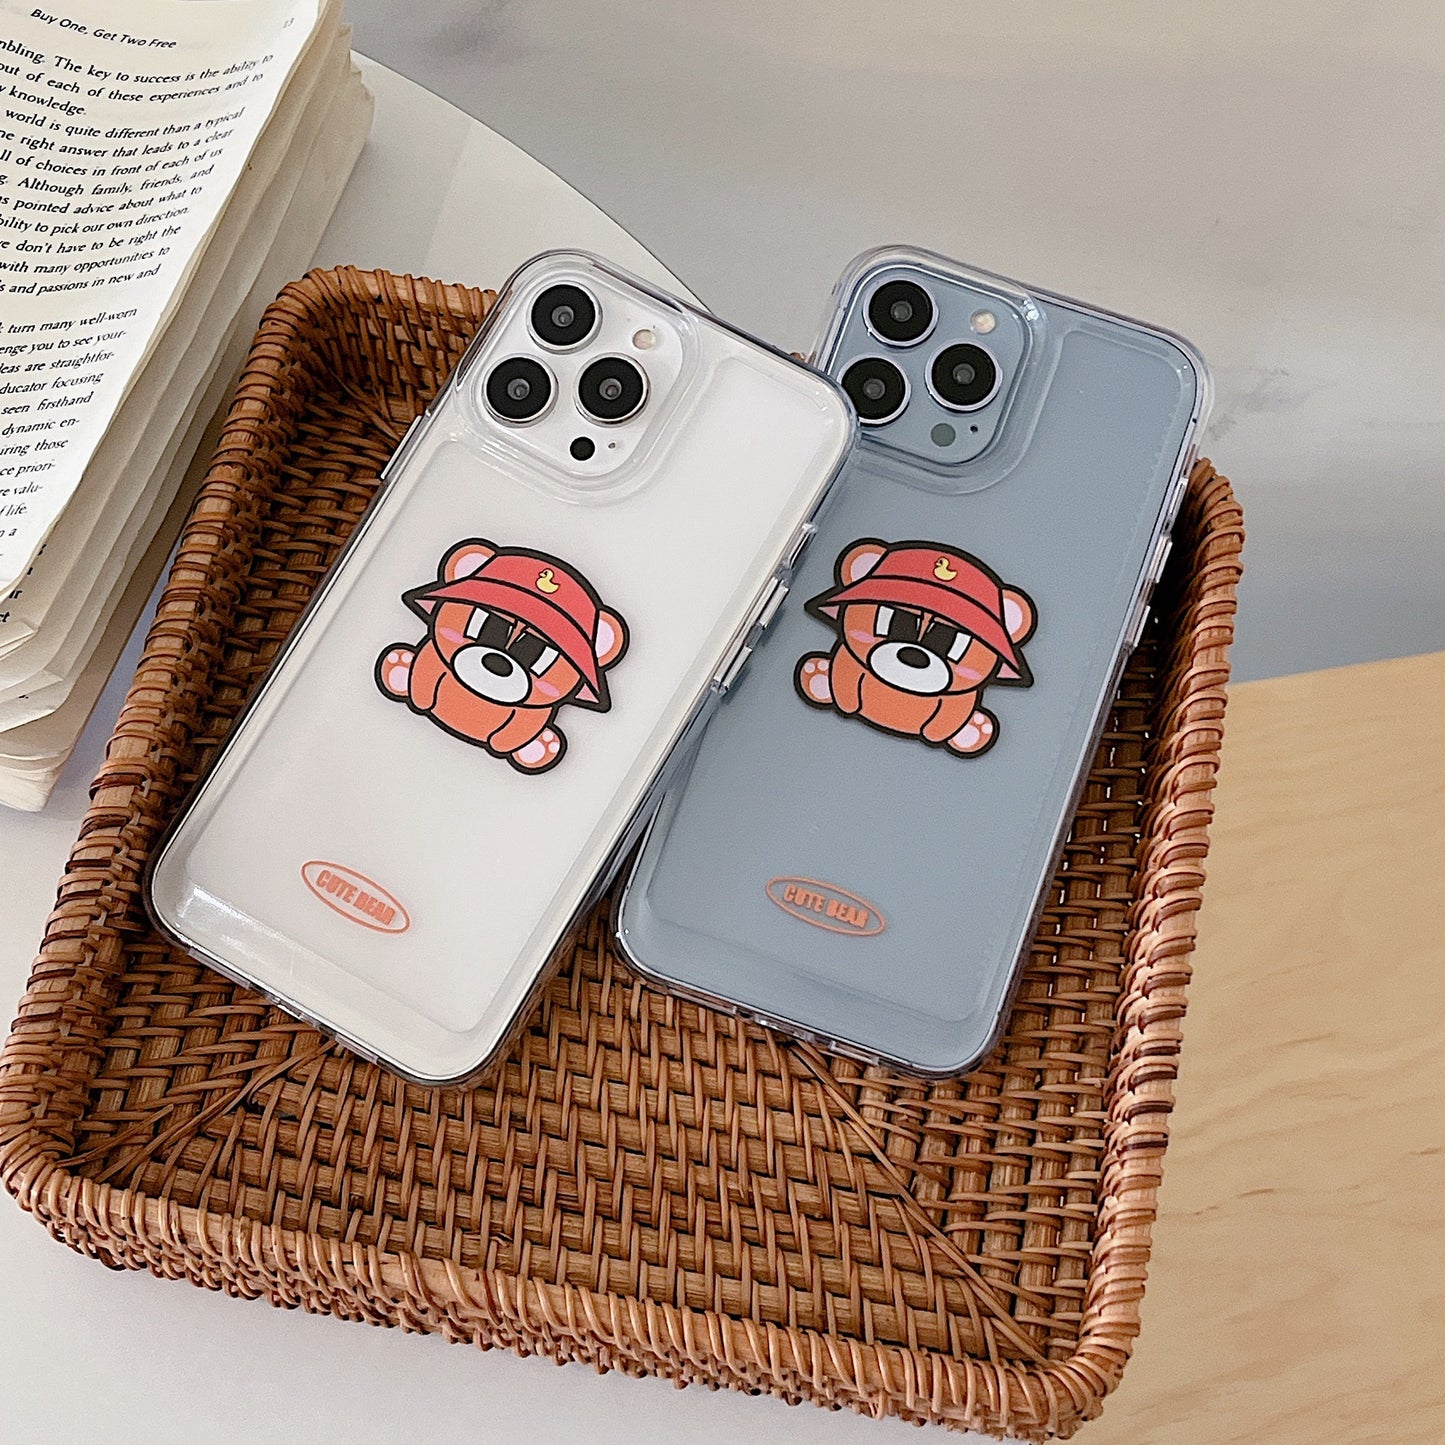 Softcase Transparent protective case with puppy design for iPhone X XR XS 11 12 13 14 Pro Max 14 Plus 7 8 Plus SE 2020